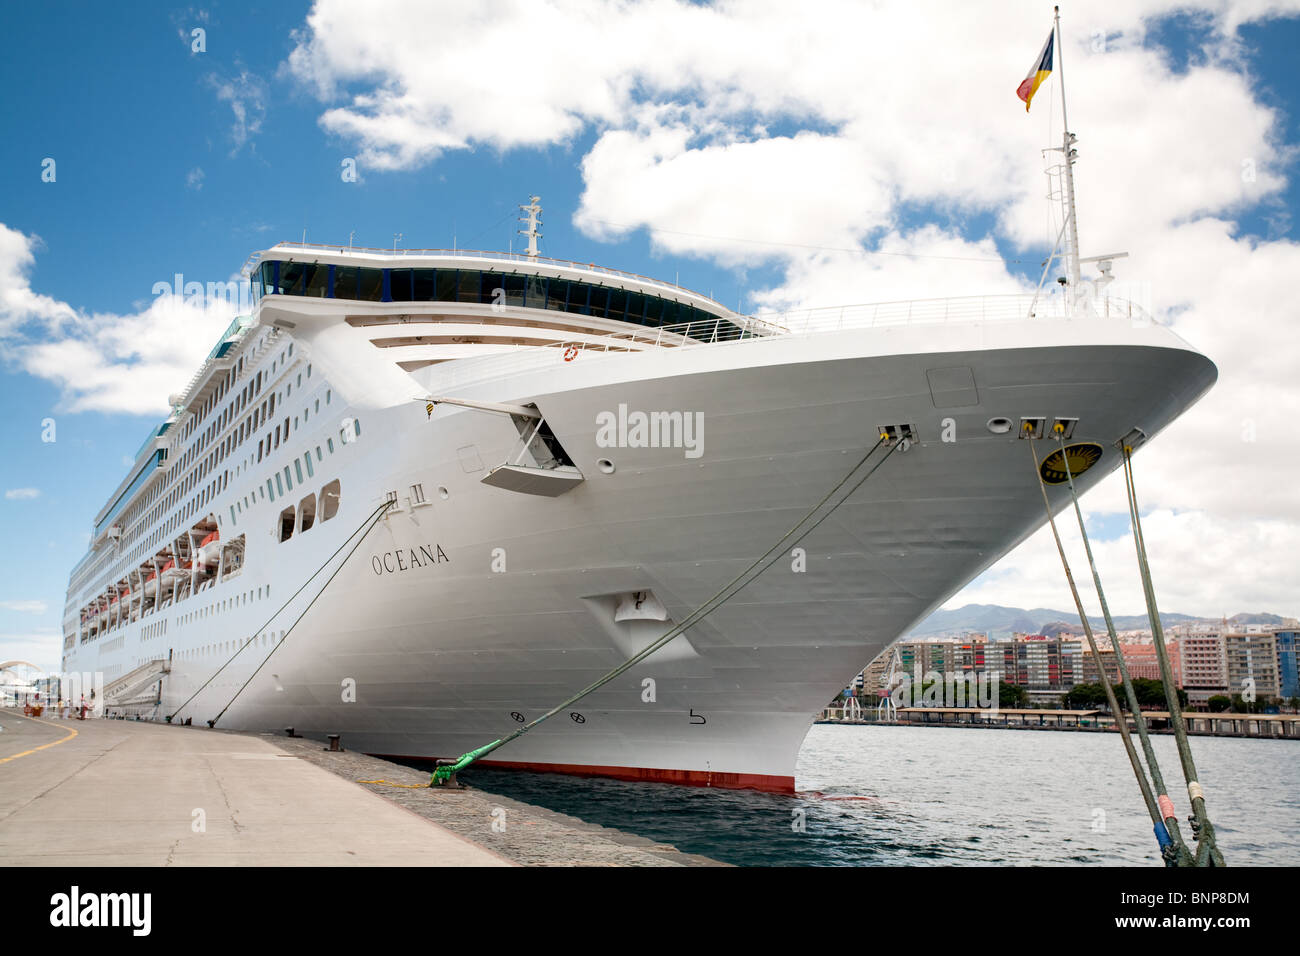 Starboard Side of a Cruise Ship Editorial Stock Photo - Image of nautics,  destination: 163786238